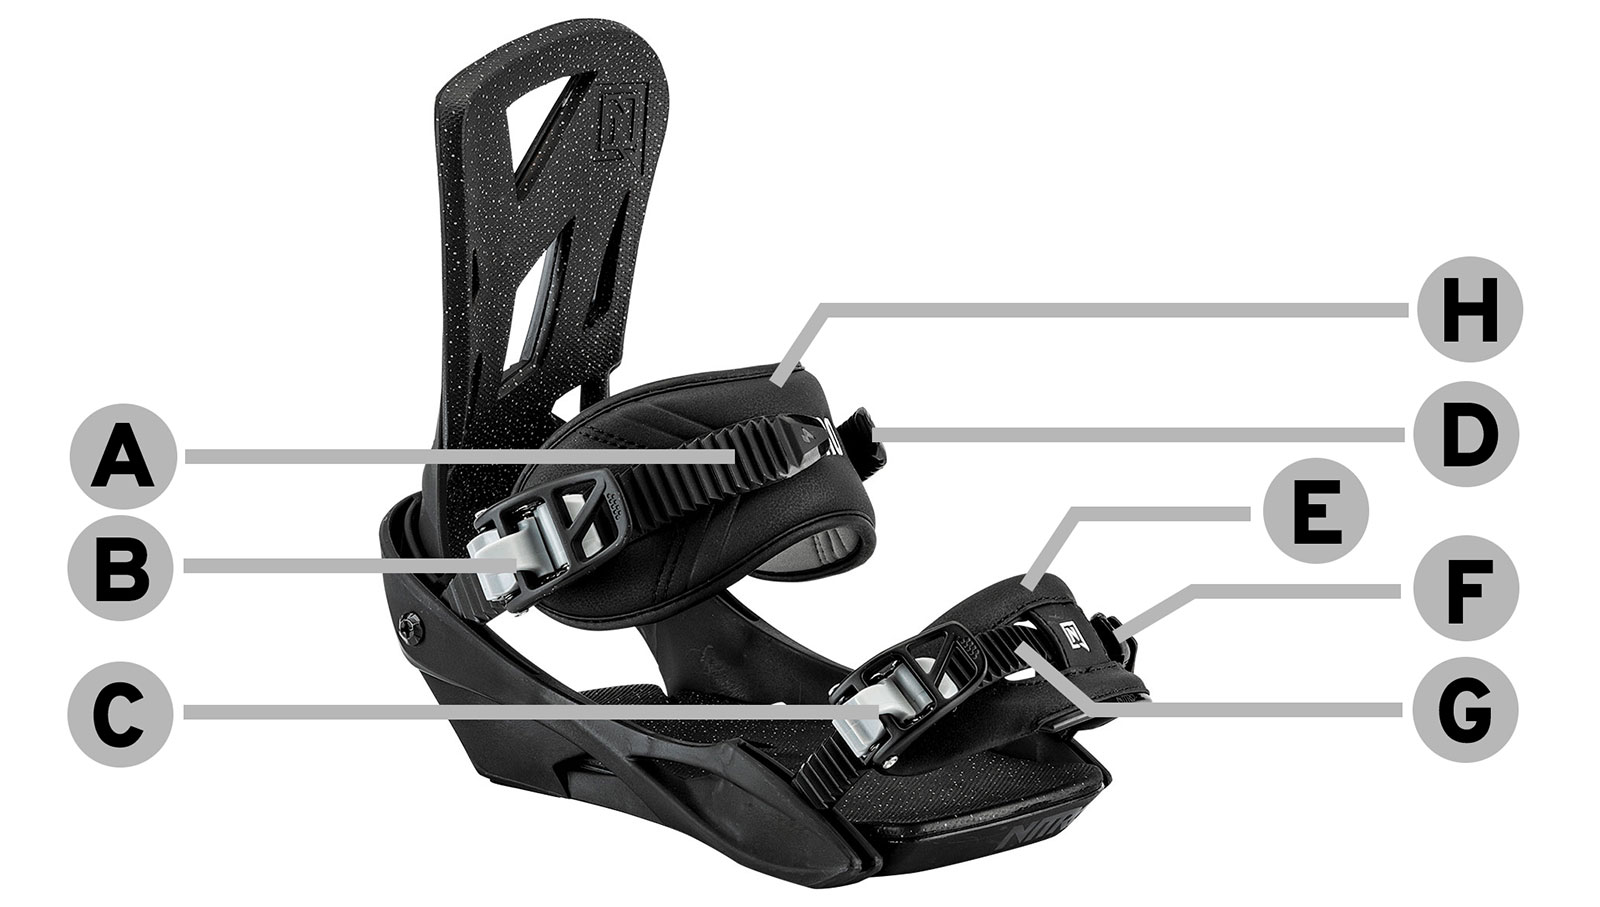 SP™ Micro Buckle Snowboard Bindings Spare Parts